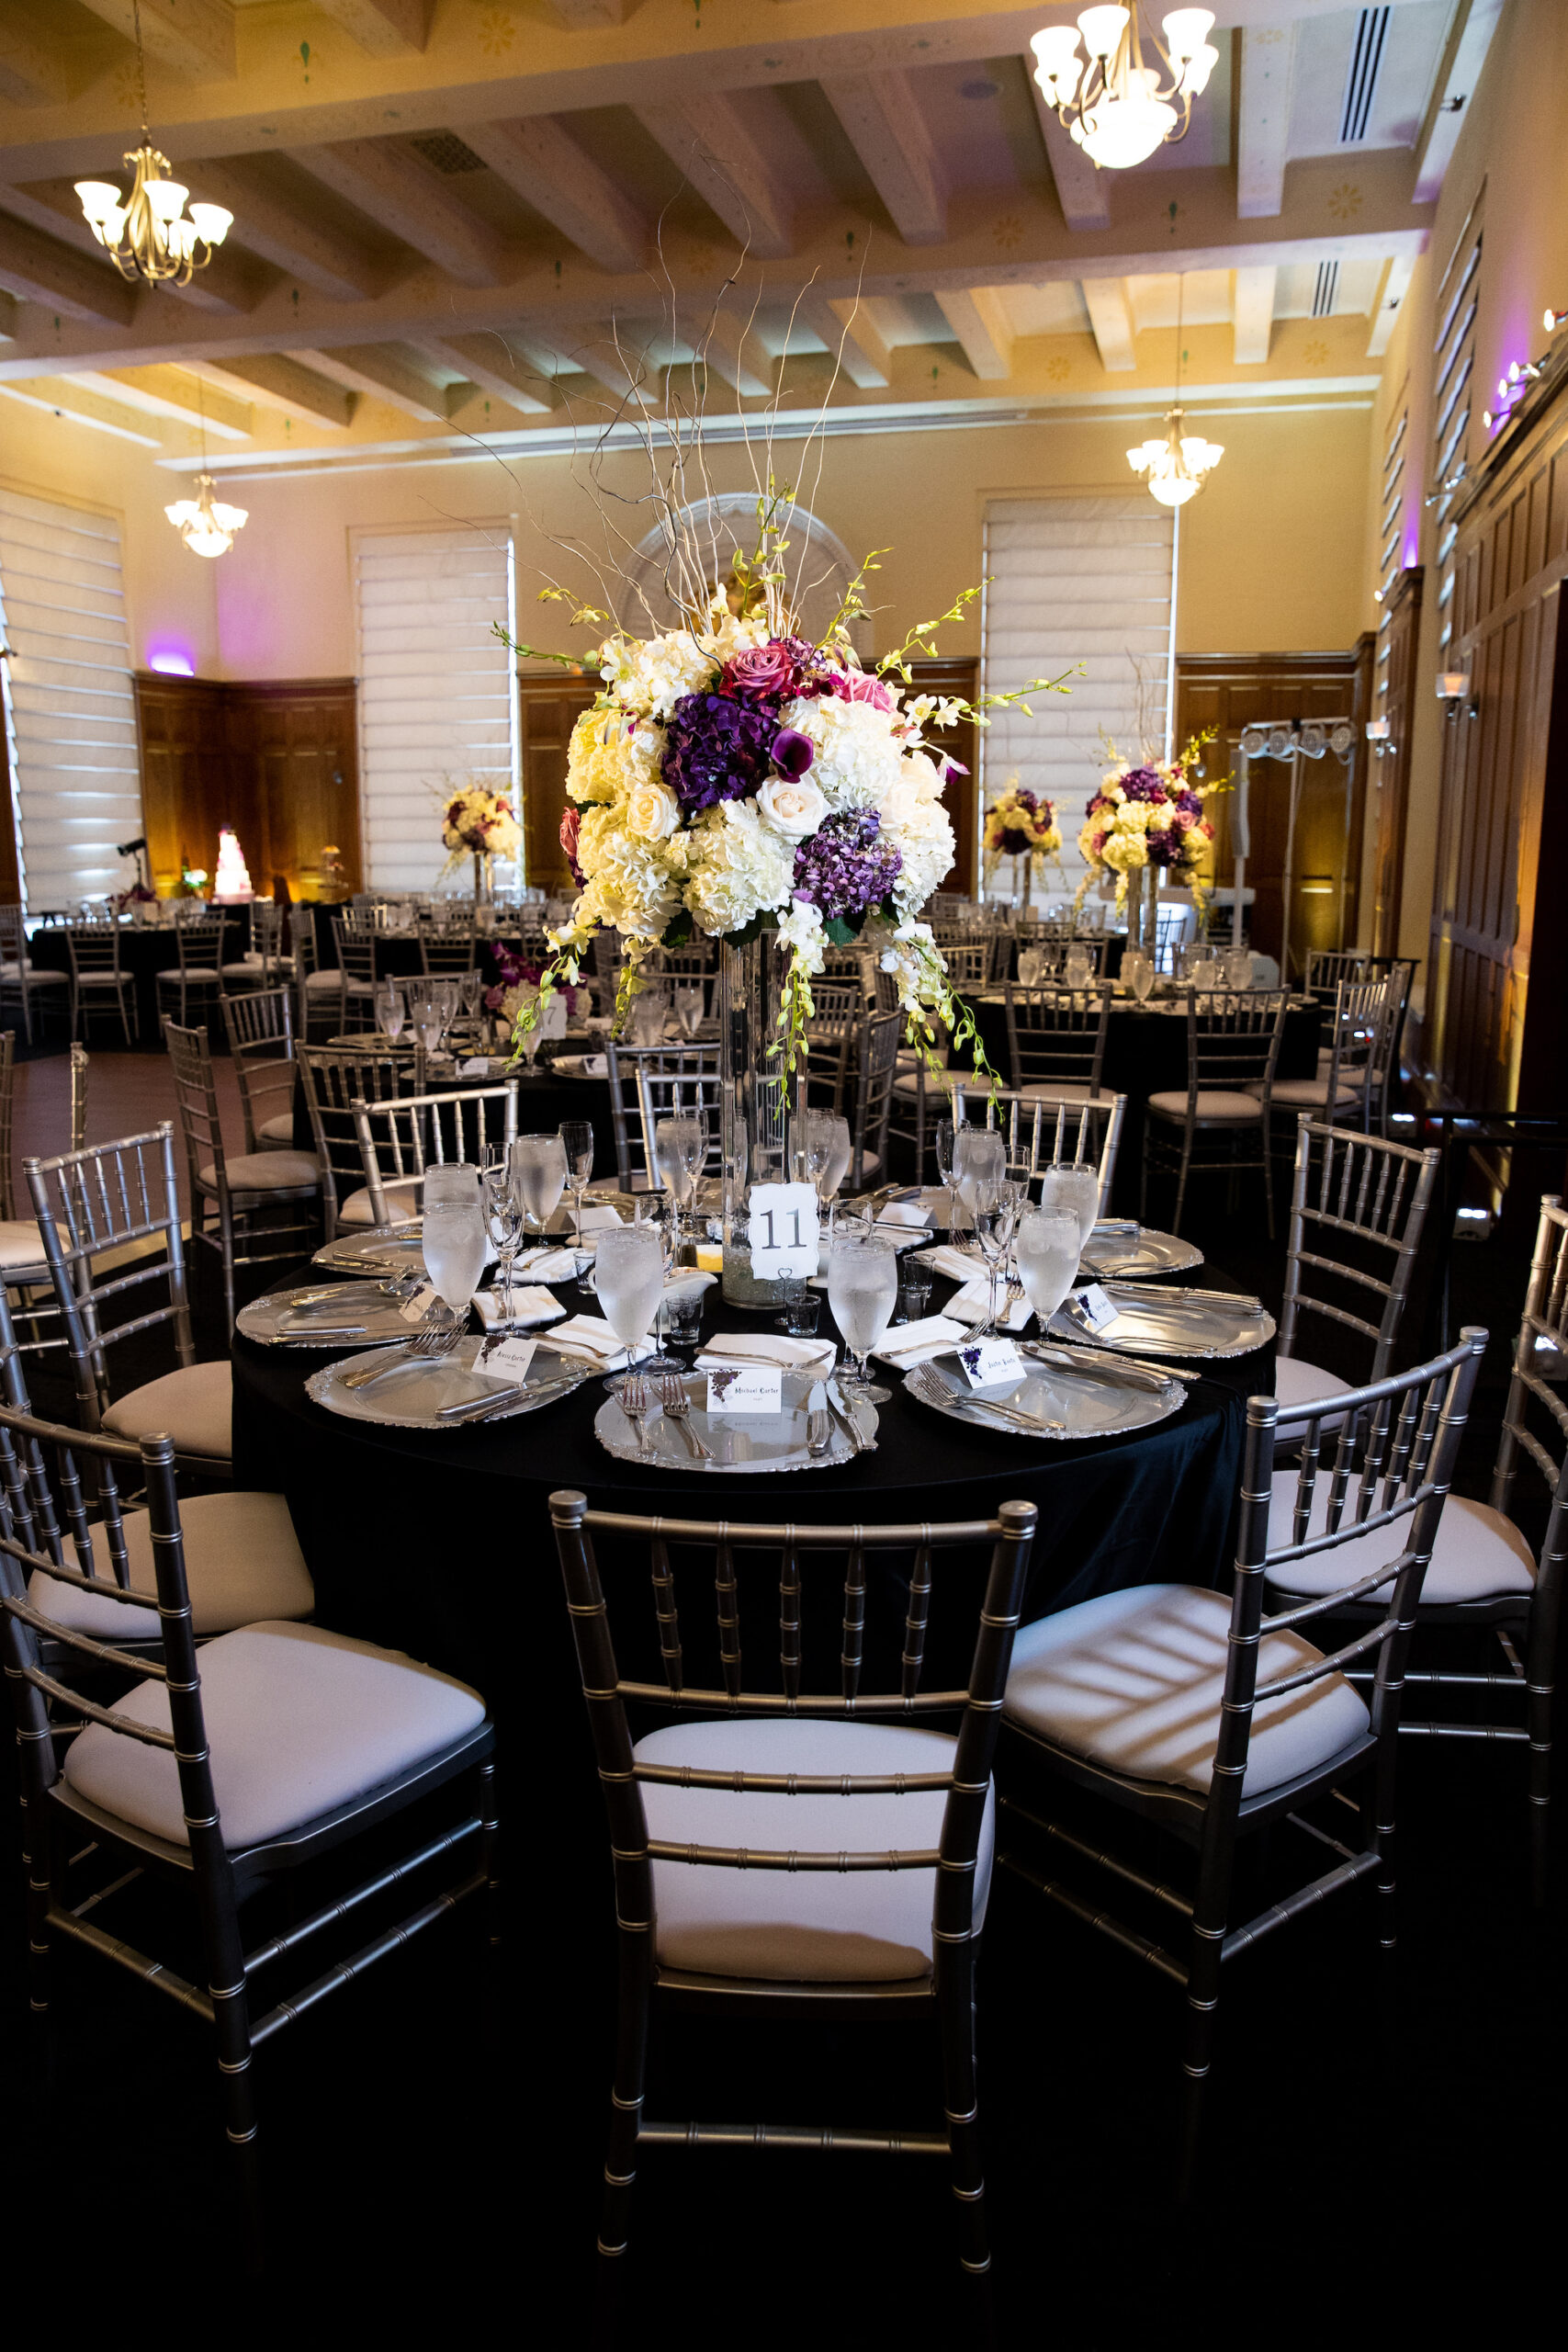 Wedding Reception with Silver Chiavari Chairs and Tall Purple and White Centerpieces | Fall Wedding Inspiration | | Tampa Event Rentals Gabro Event Services | Venue Le Meridien